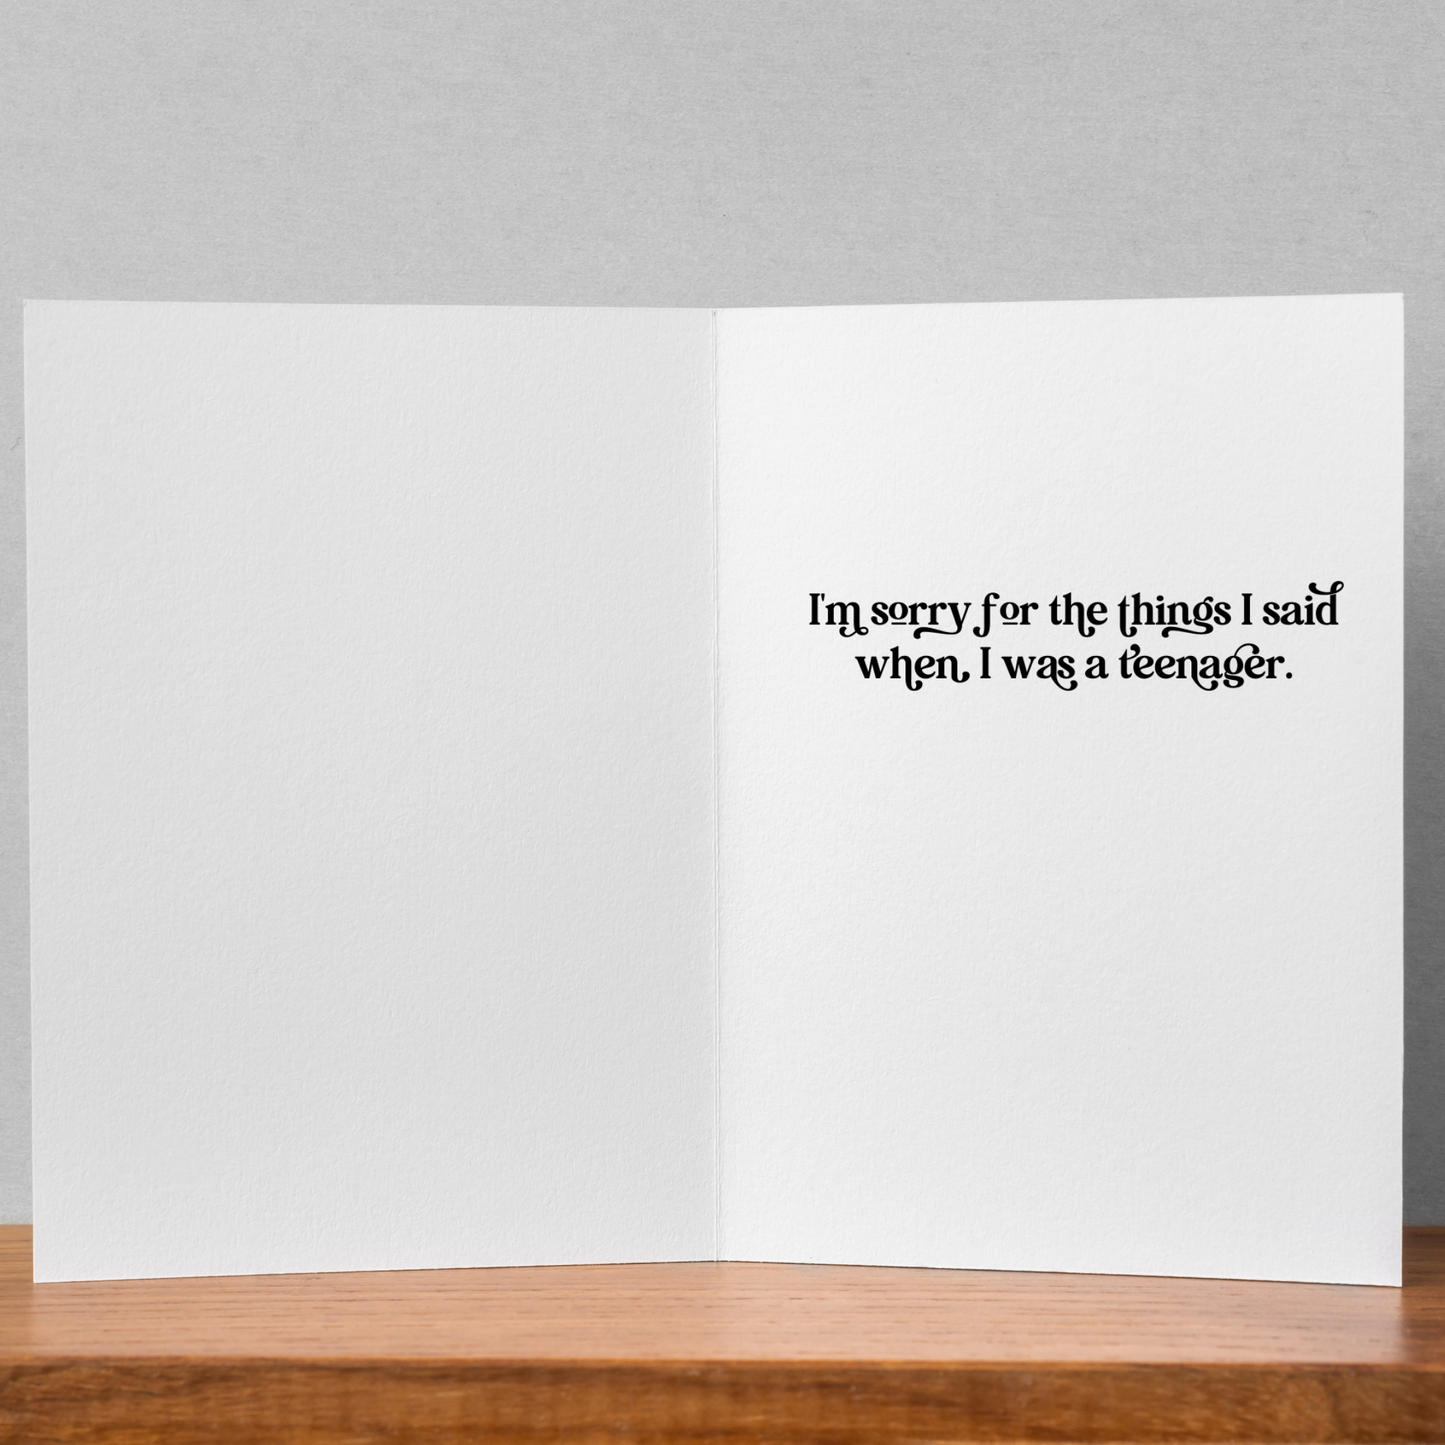 Mom, I Just Want to Say | Greeting Card